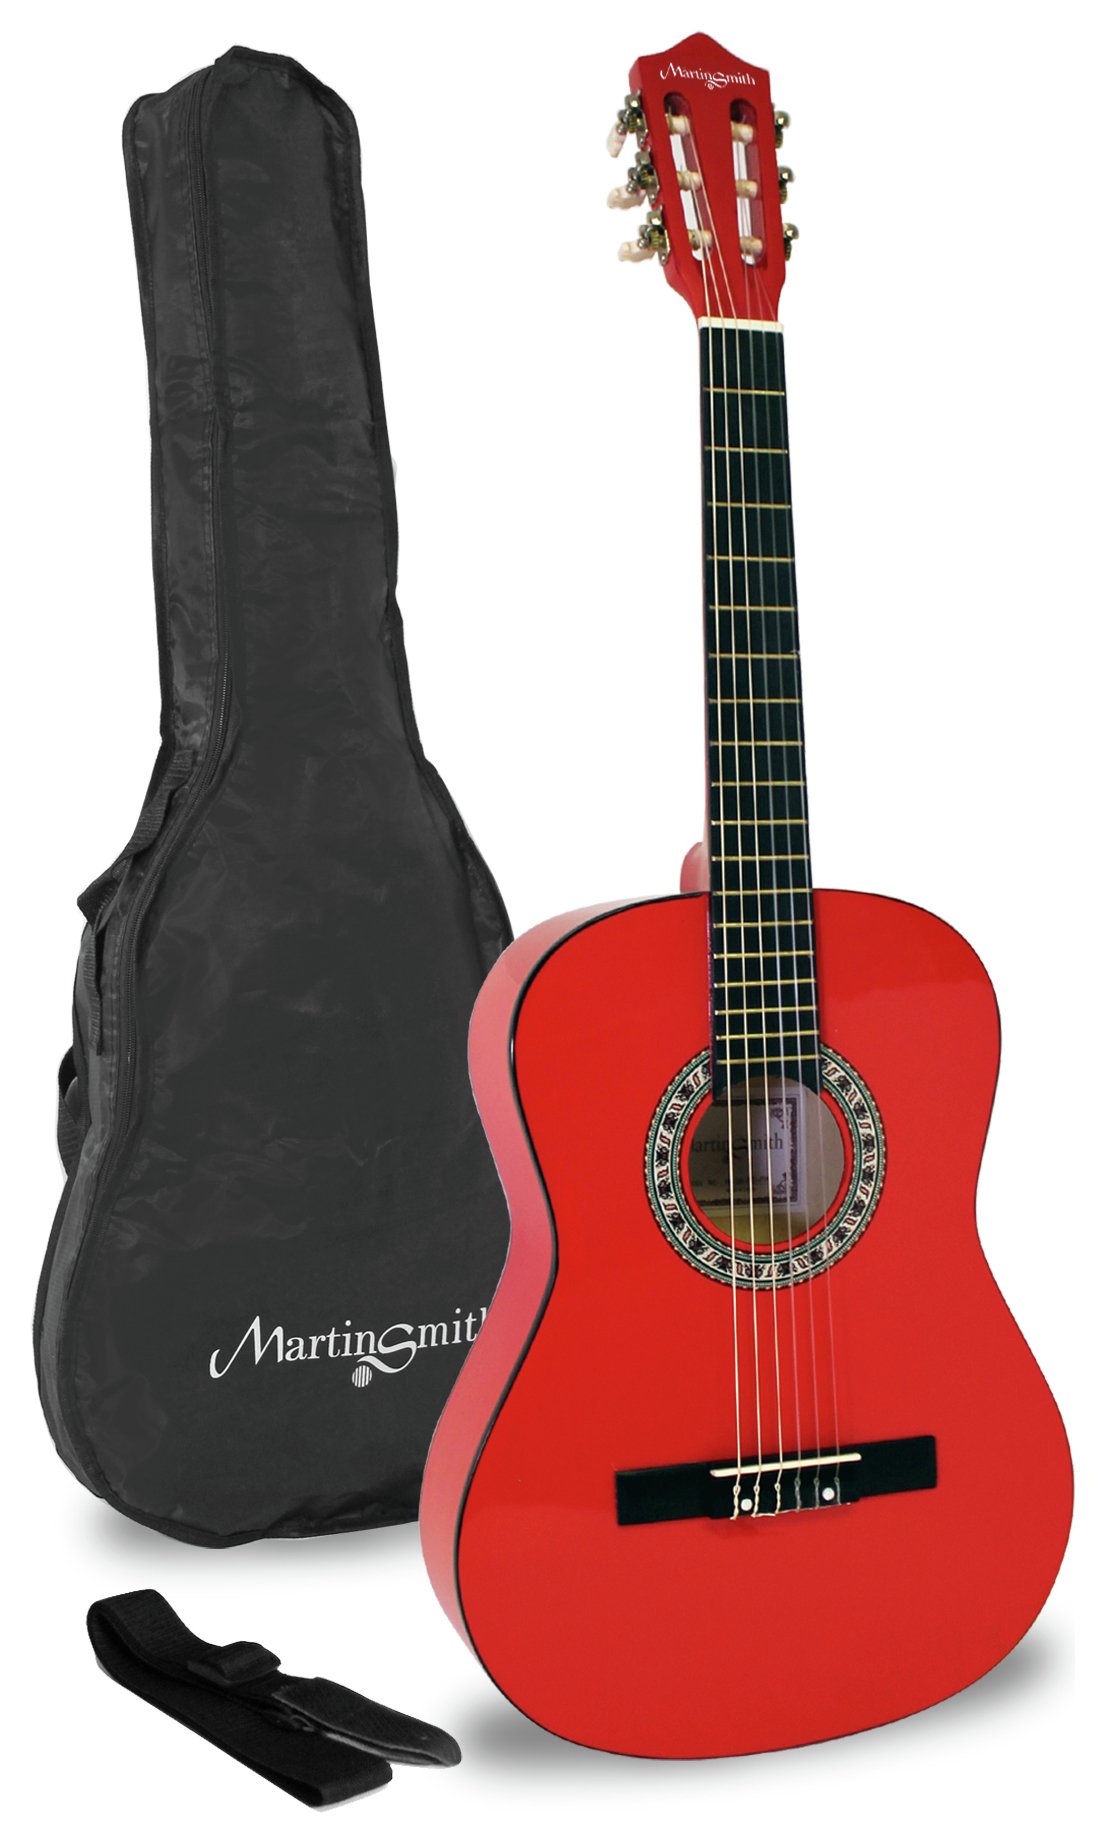 Martin Smith 36 Inch Classical Guitar Review